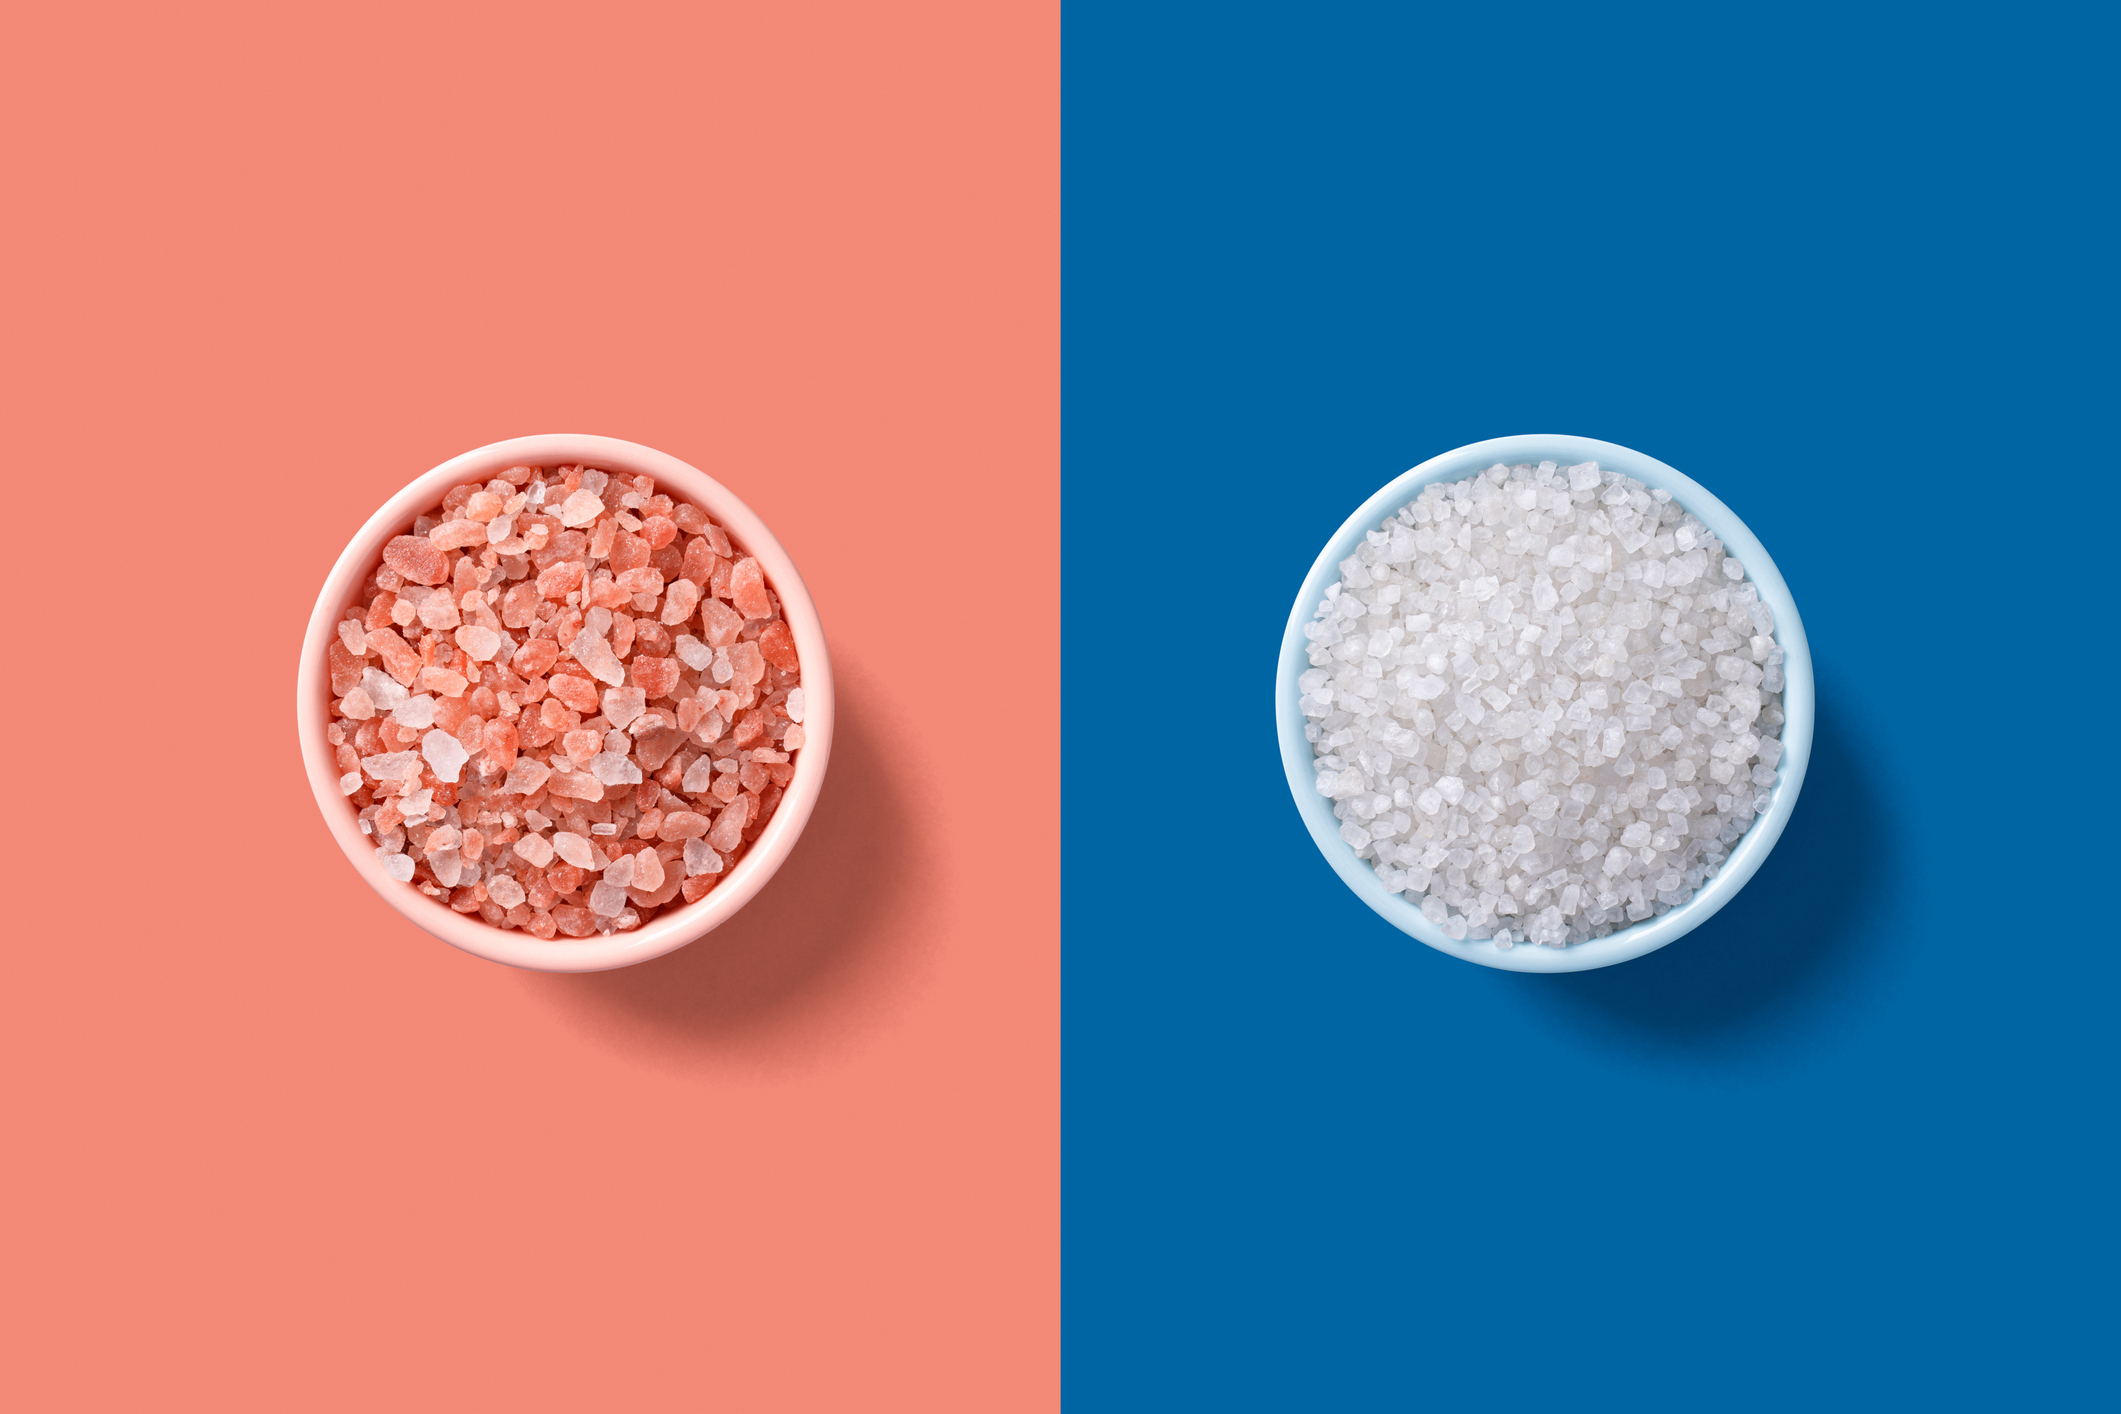 Two bowls of salt, one with pink salt and one with white salt, on split background